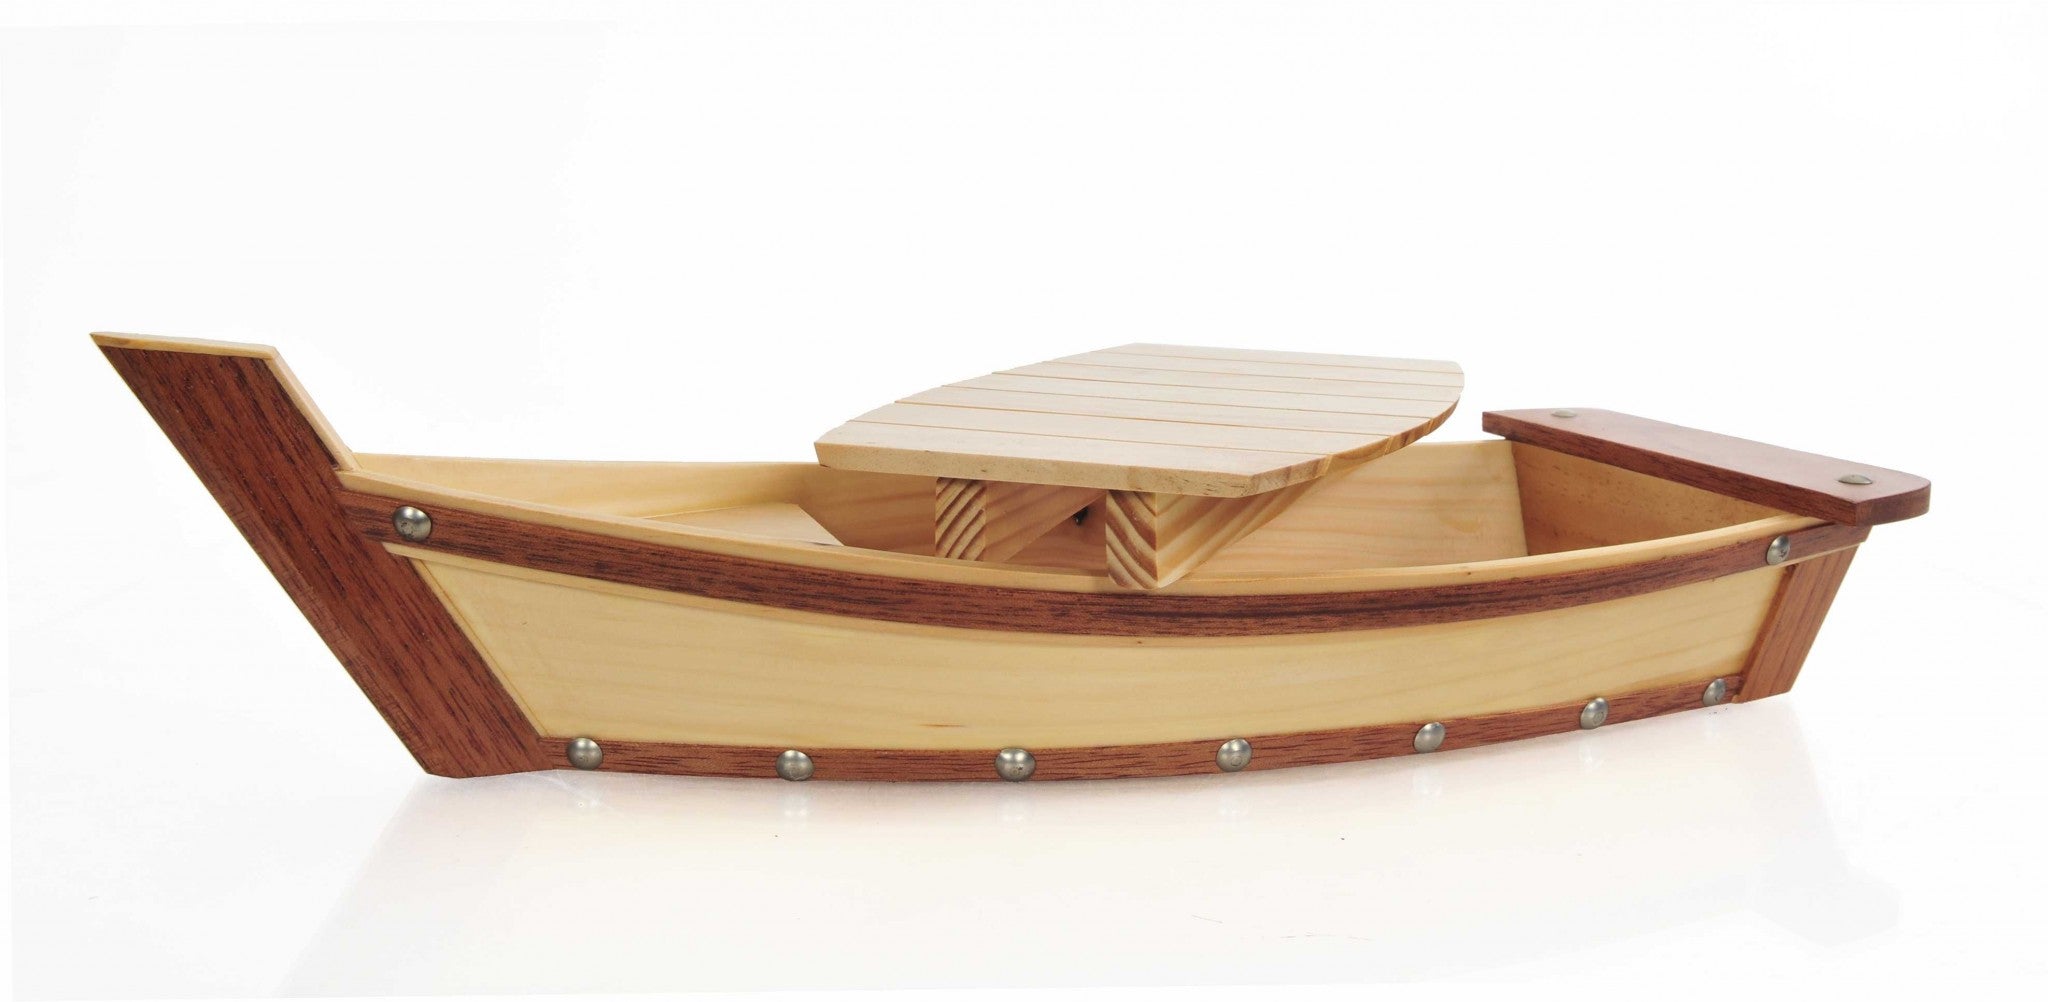 6.25" X 16.75" X 3.37"  Small Wooden Sushi Boat  Serving Tray